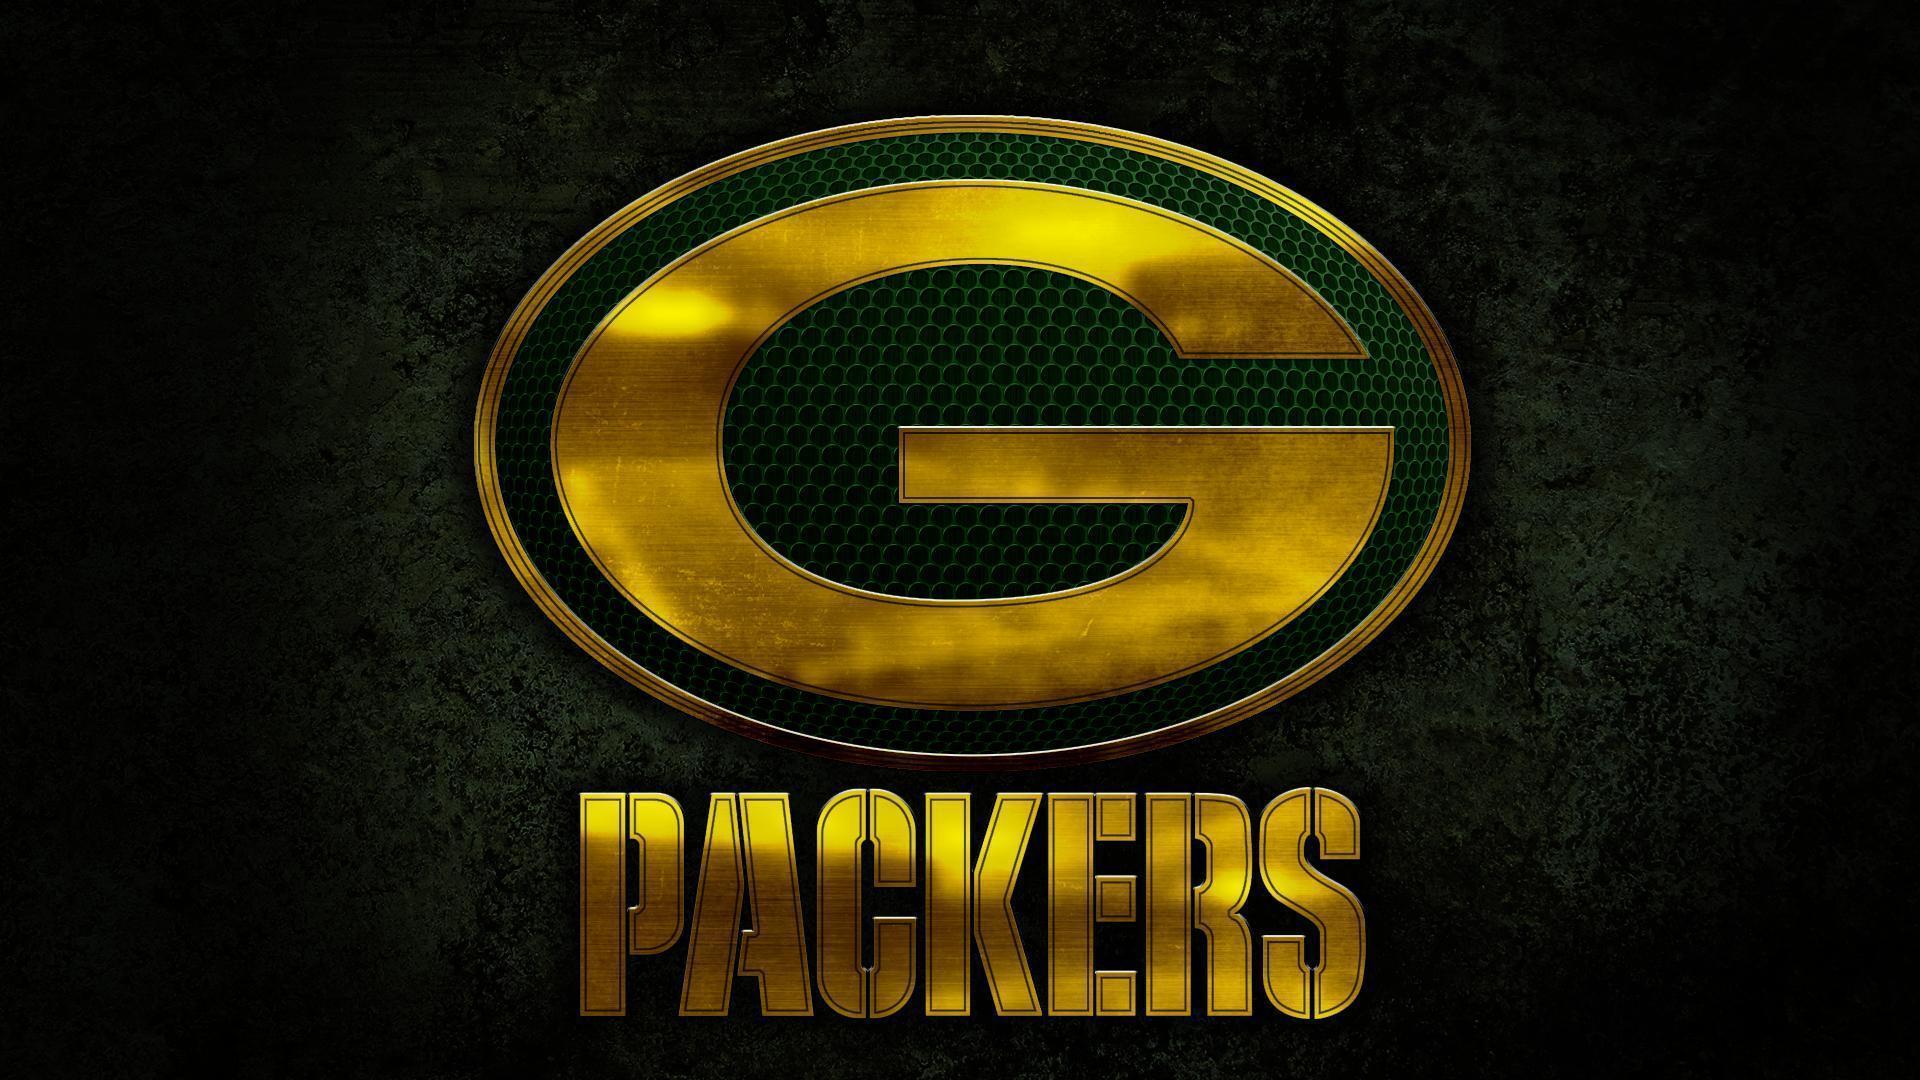 What are your Packers wallpaper?